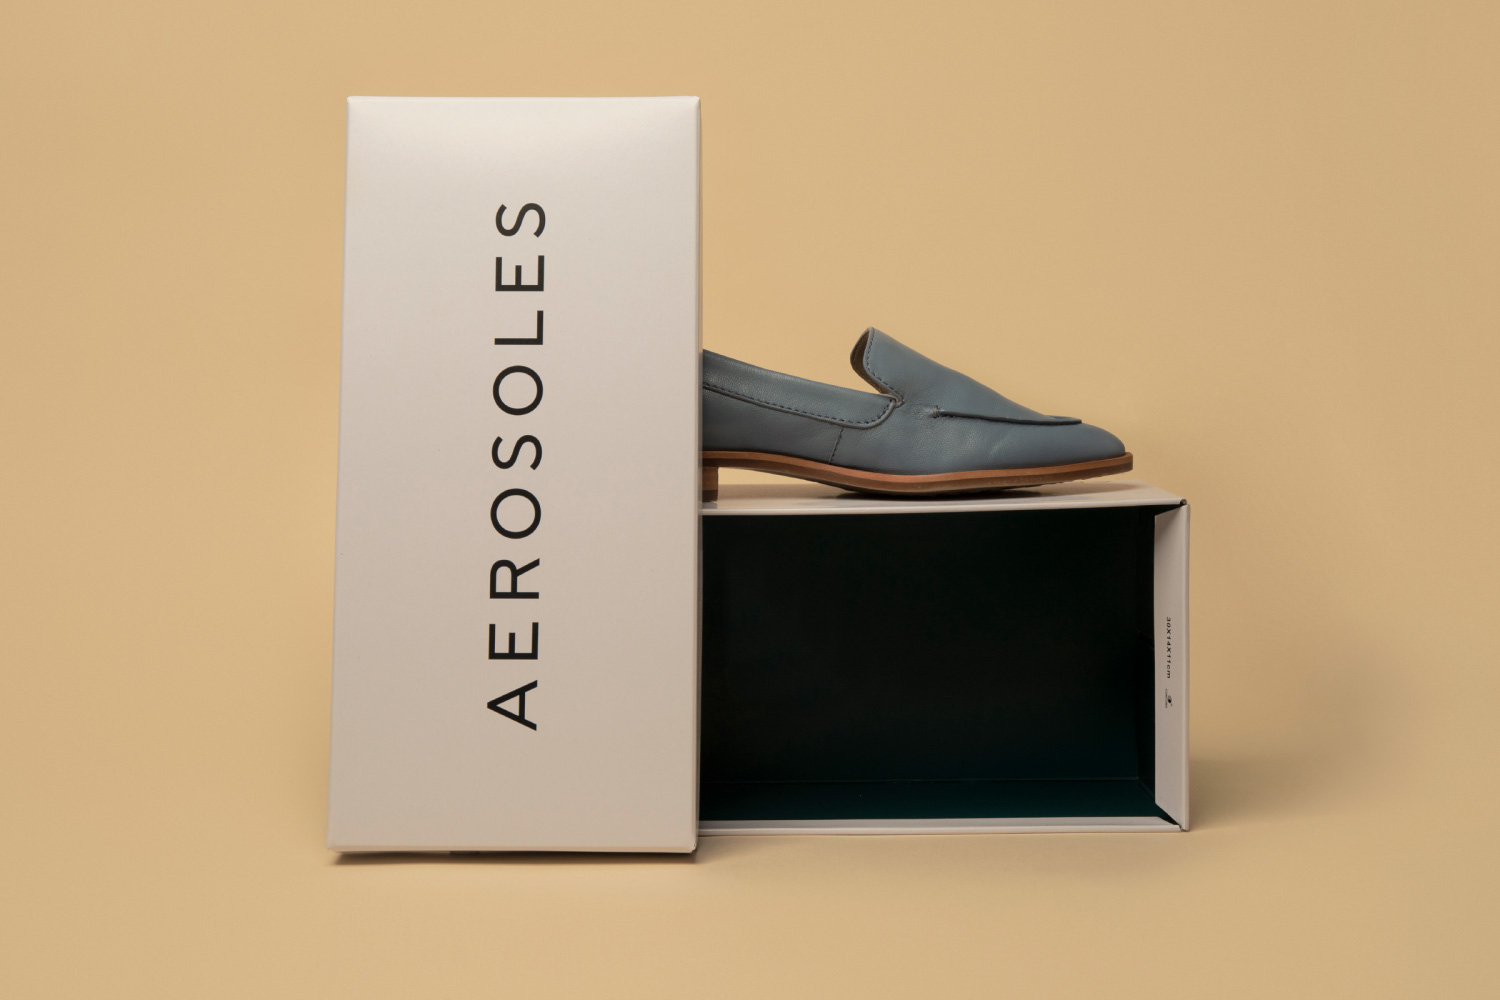 New Logo and Identity for Aerosoles by YummyColours